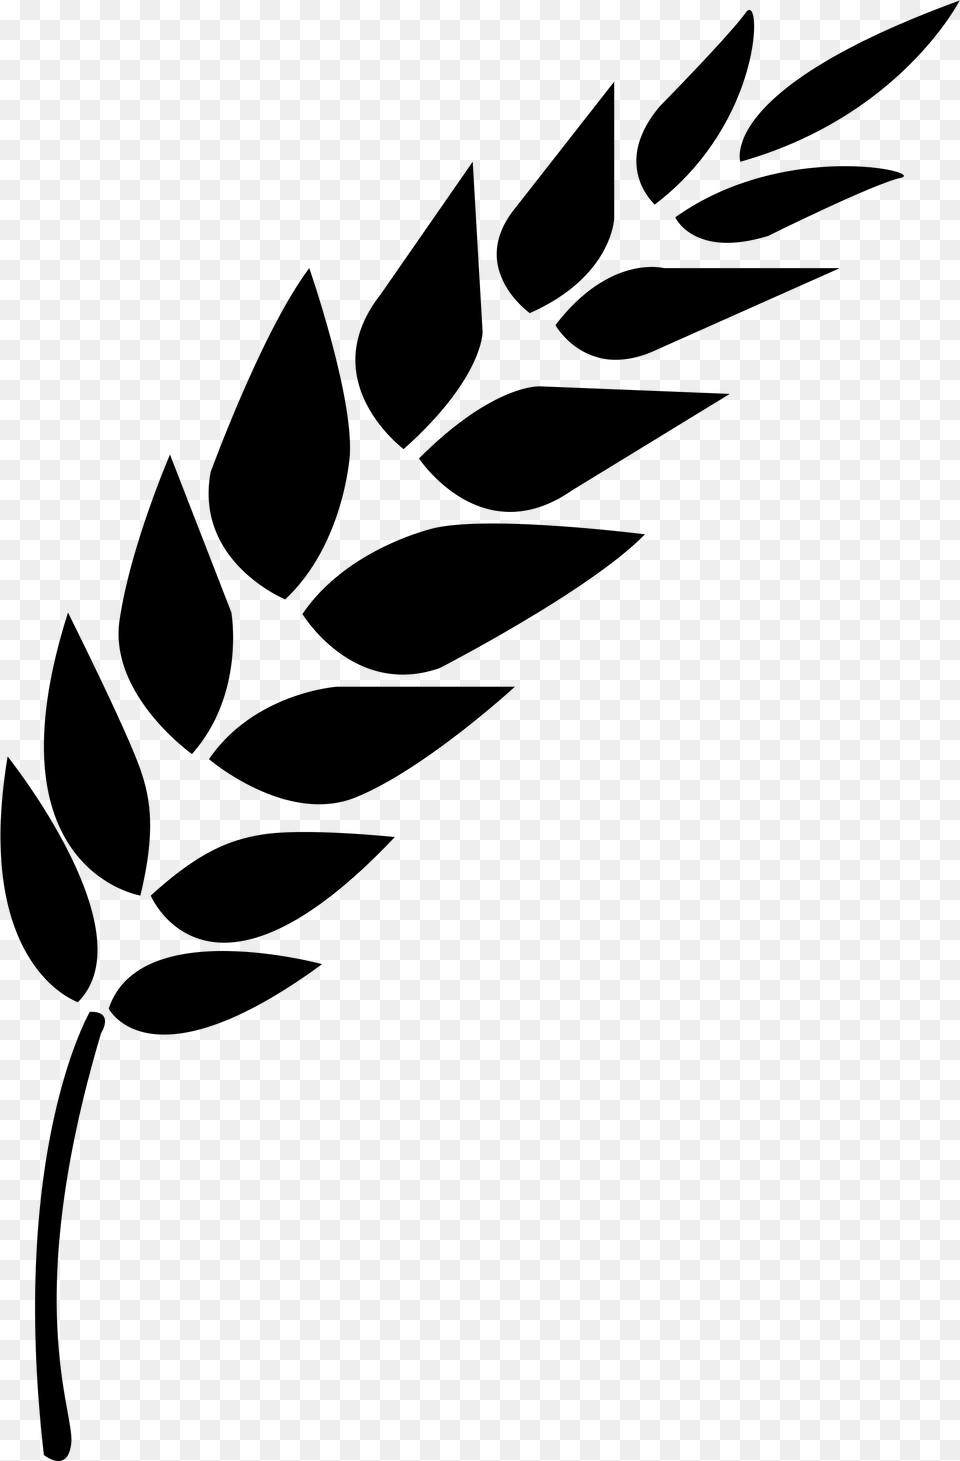 Black And White Wheat Stalk Clipart Icon Vector Wheat, Gray Free Png Download